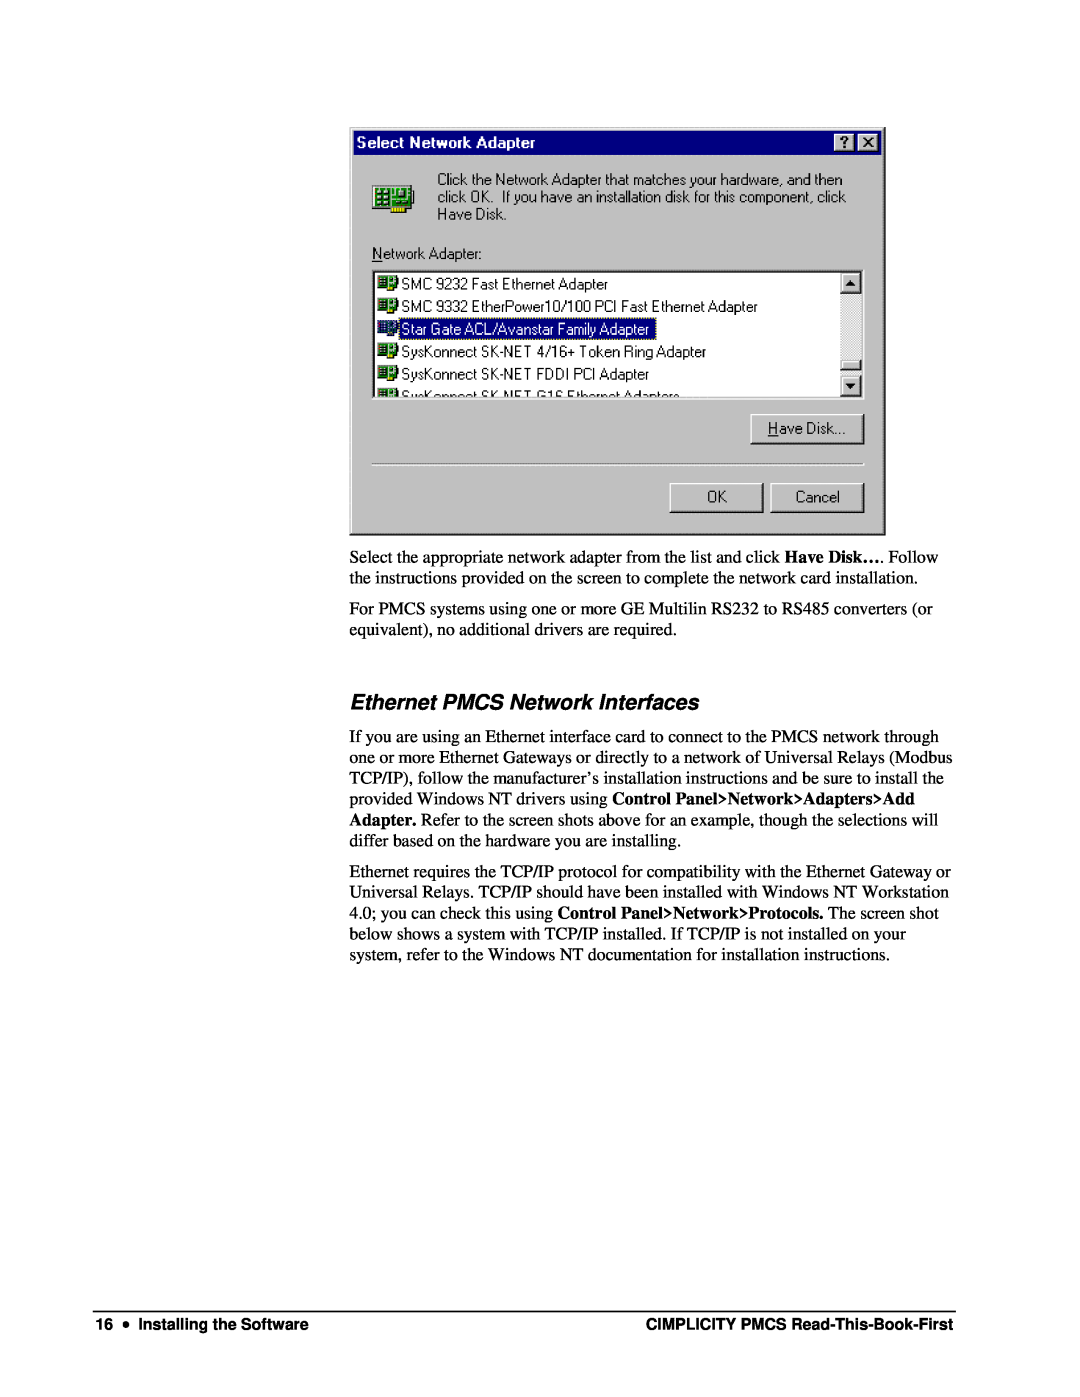 GE DEH-211 manual Ethernet PMCS Network Interfaces, Installing the Software, CIMPLICITY PMCS Read-This-Book-First 